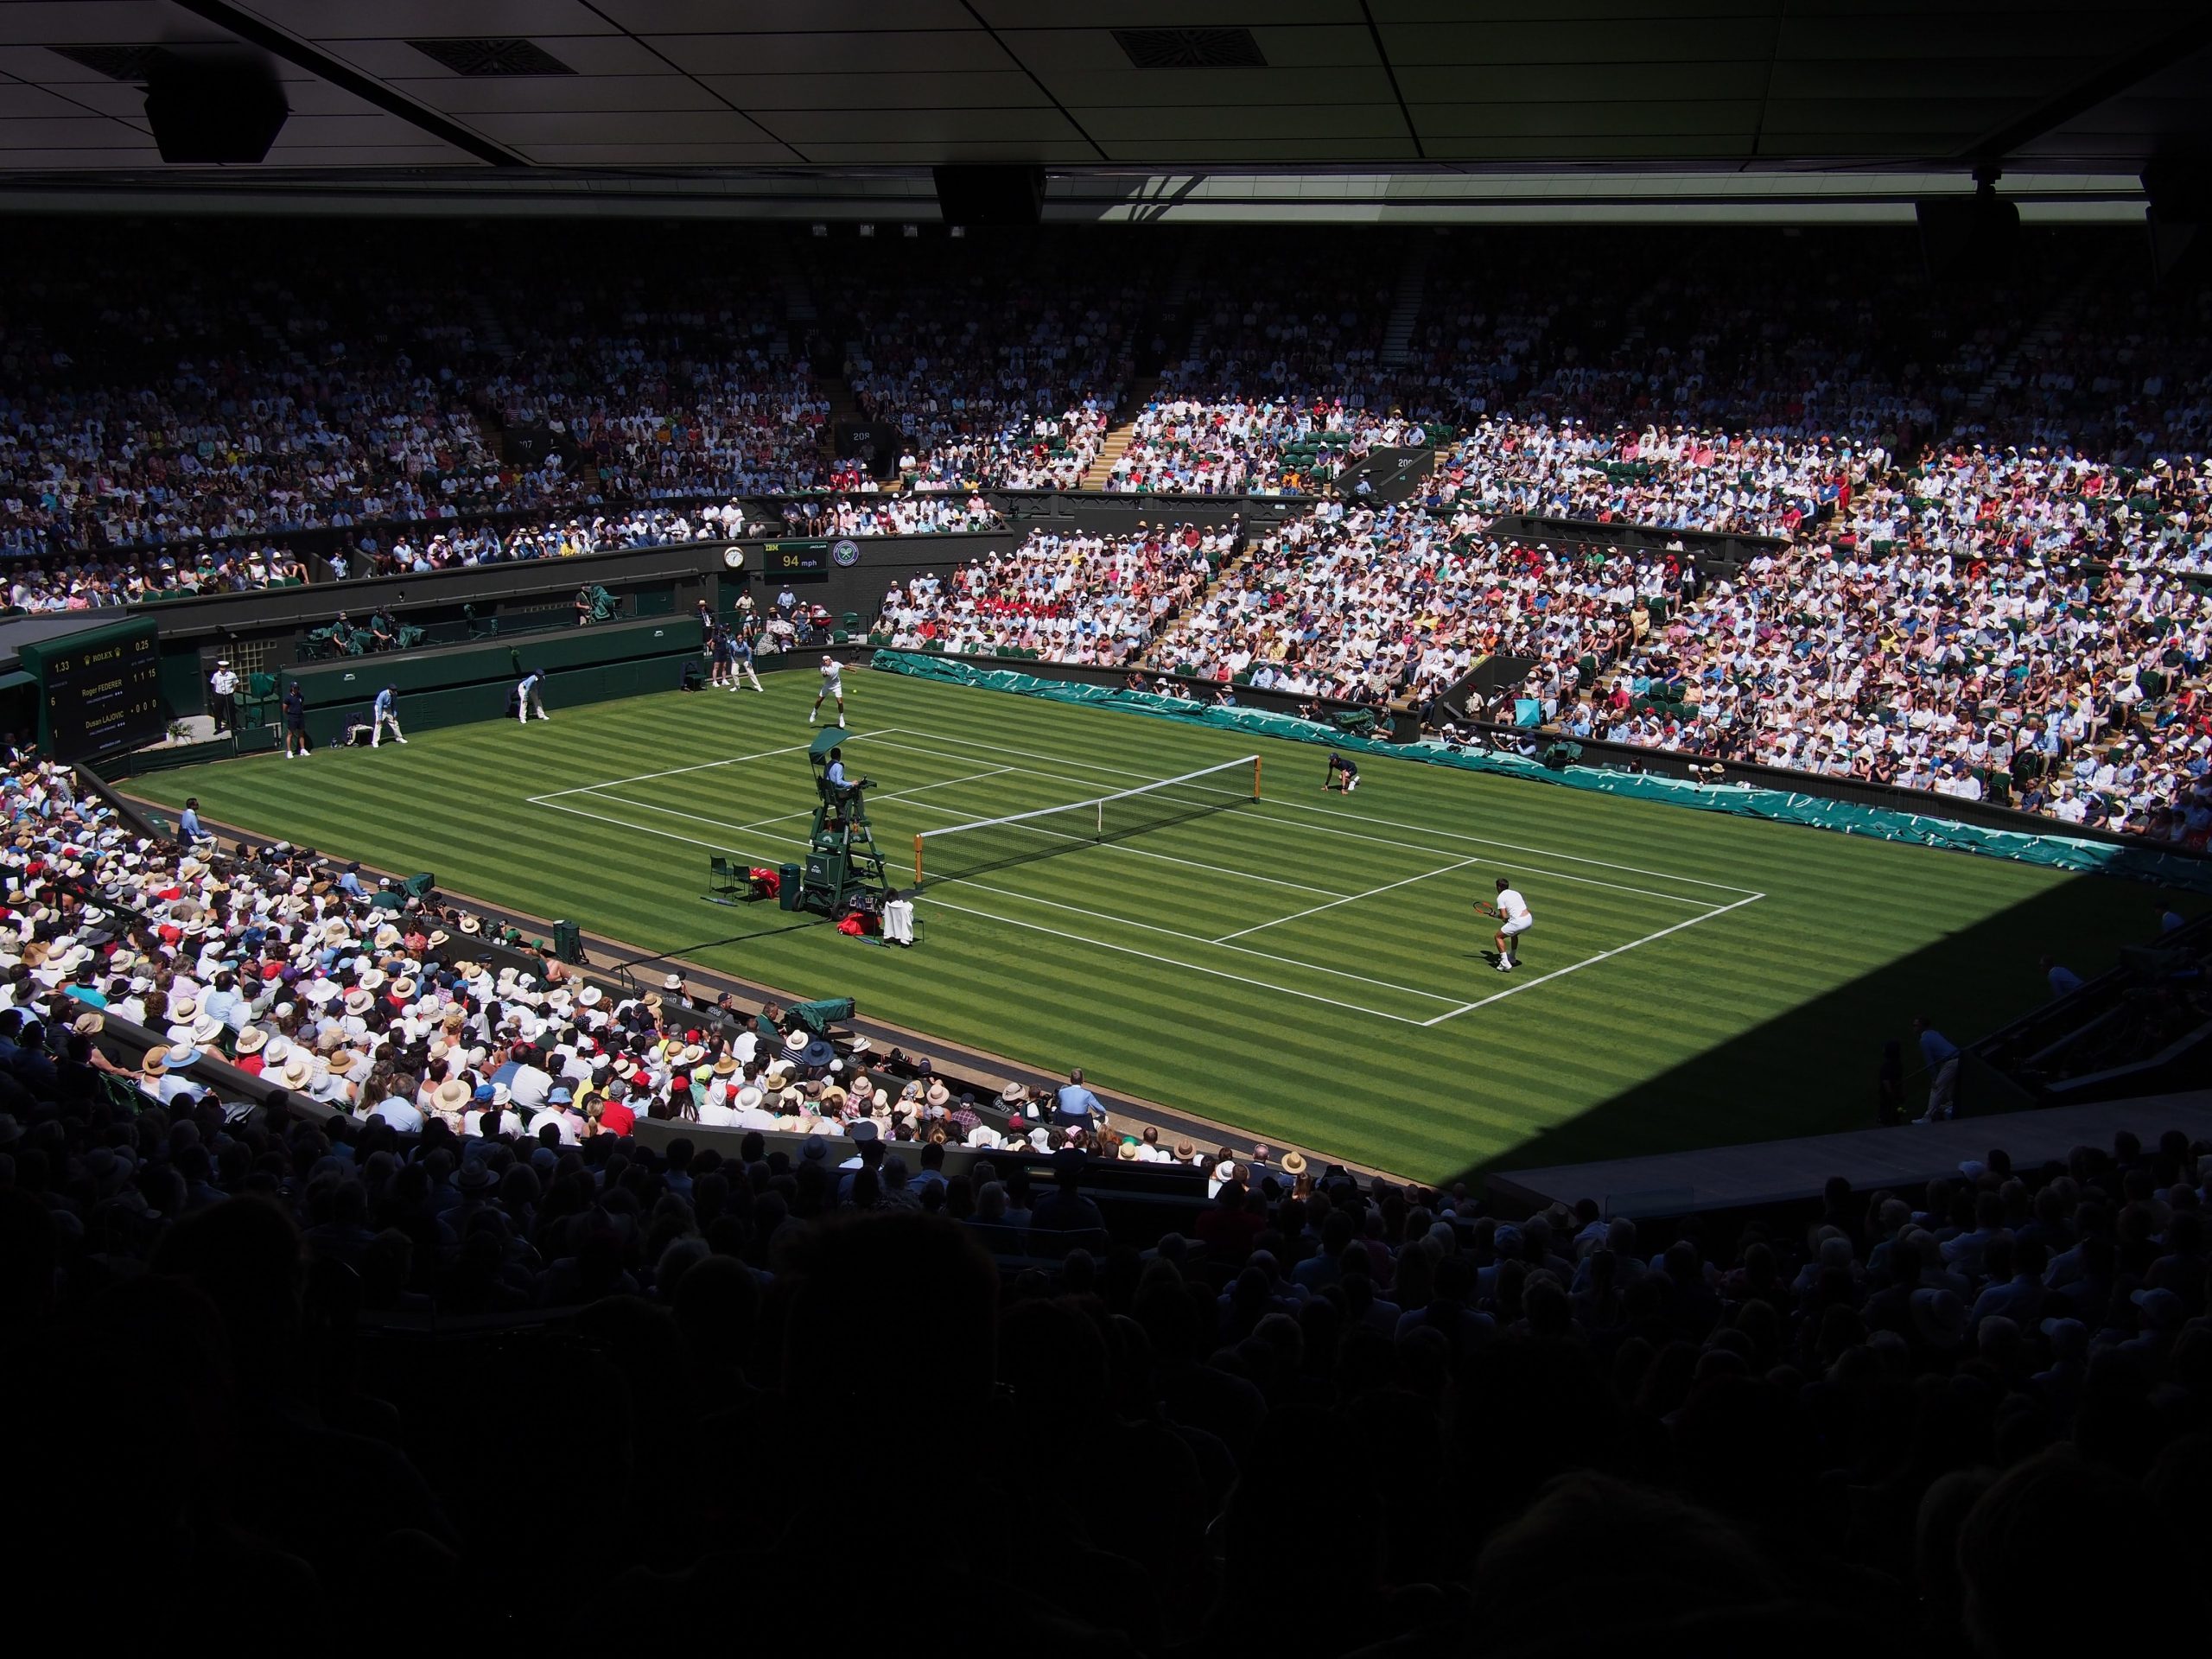 Wimbledon to be held in London amid strict COVID protocols